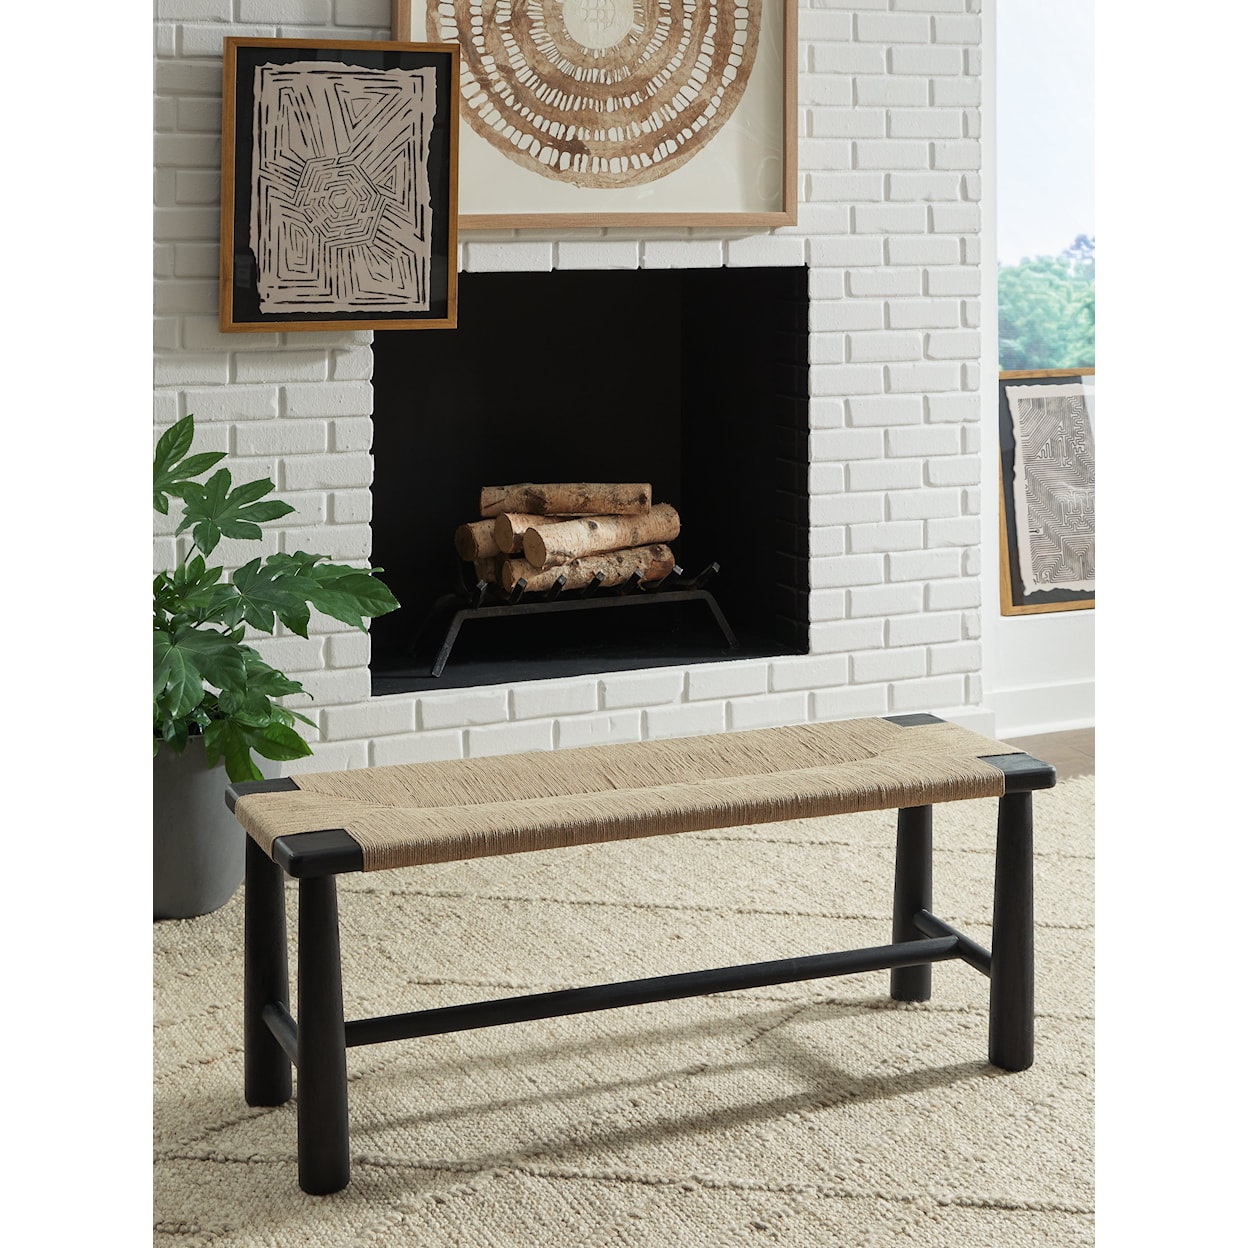 Benchcraft Acerman Accent Bench